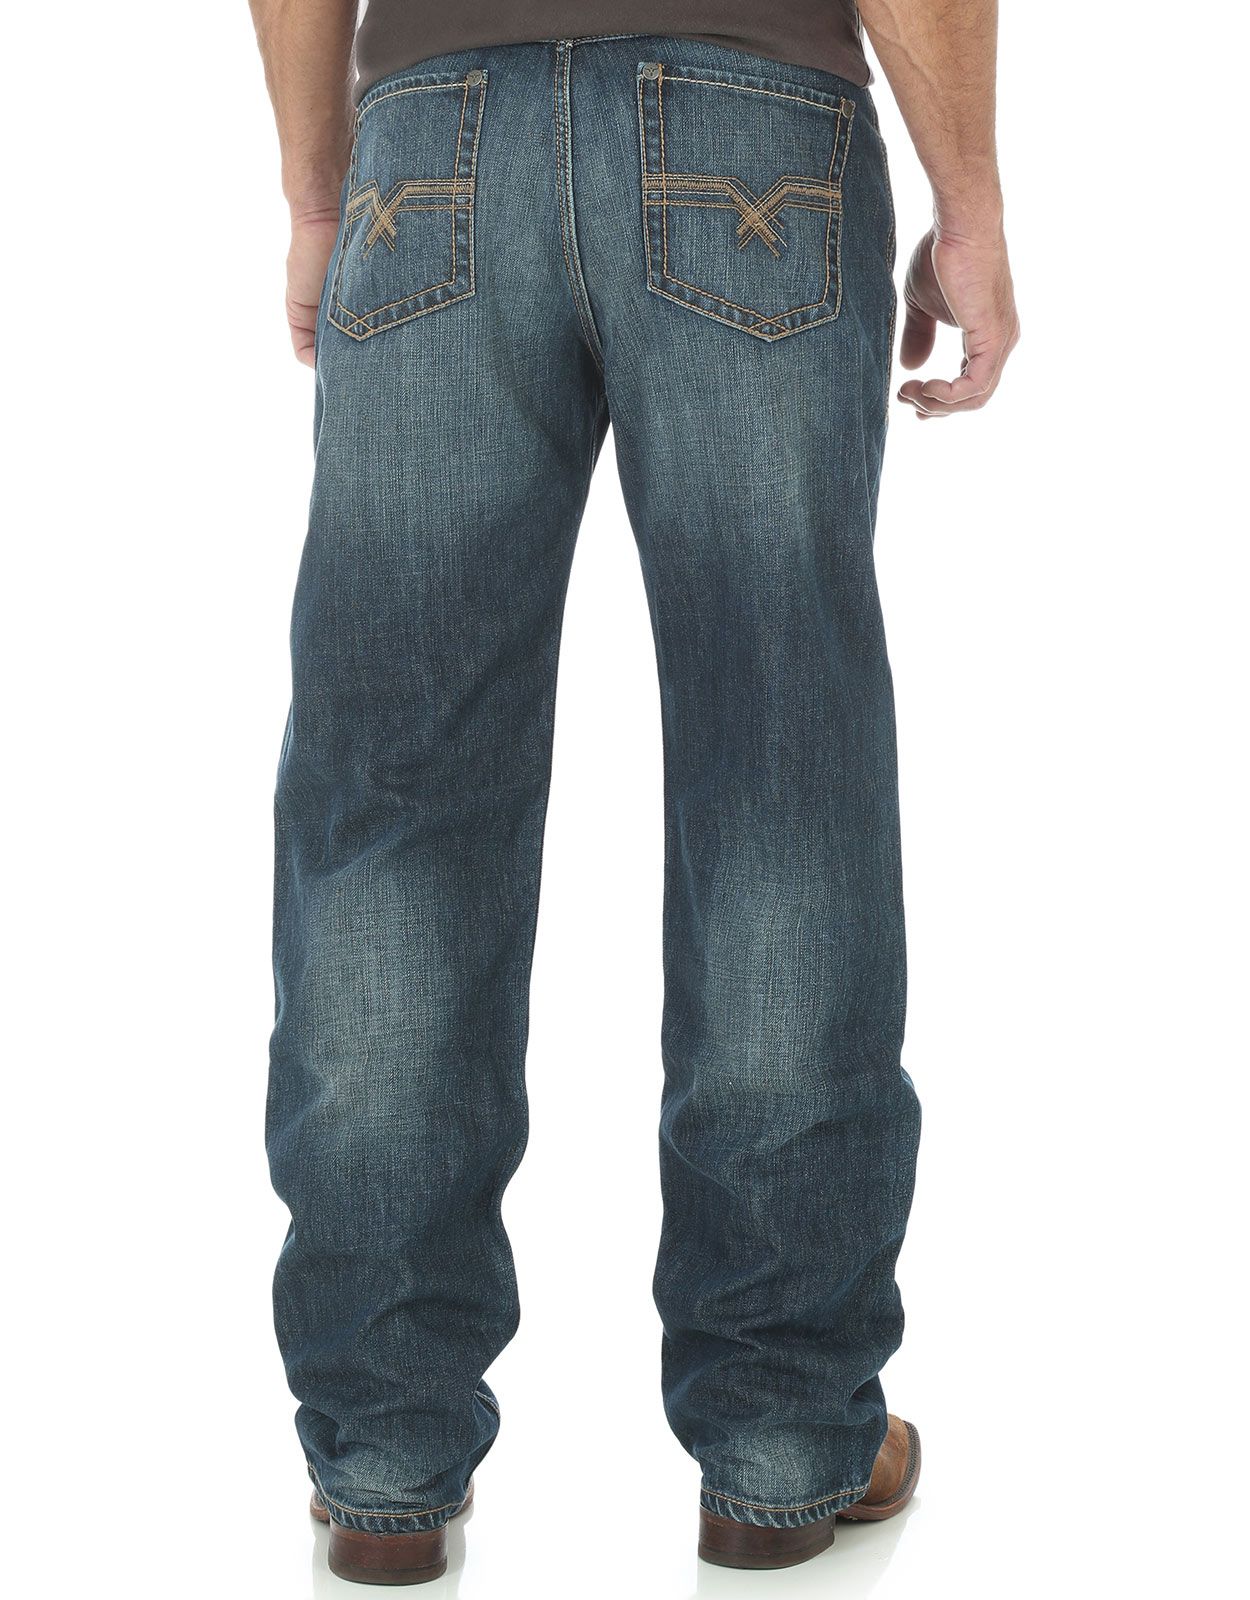 Wrangler 20X 33 Men's Loose Fit Jeans from Langston's - Wells